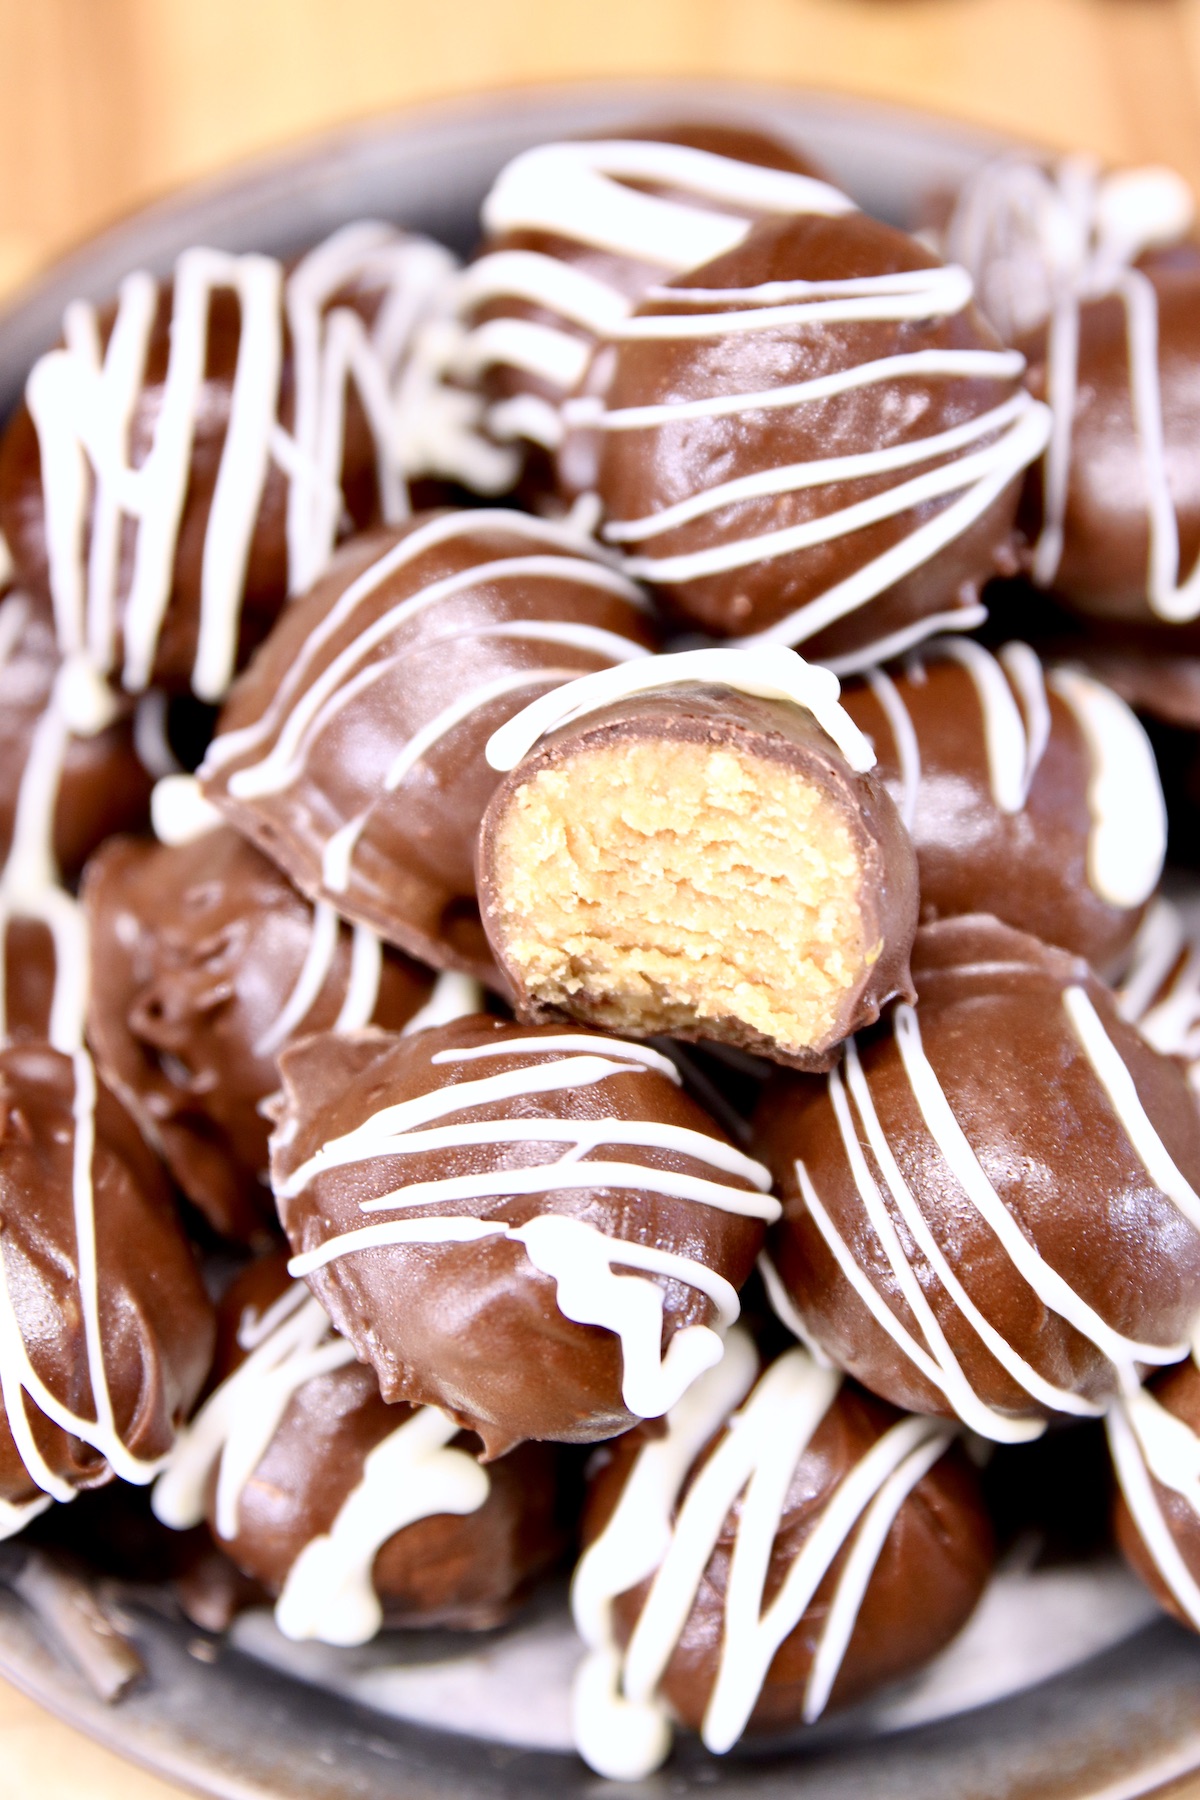 Peanut Butter Truffles with chocolate coating